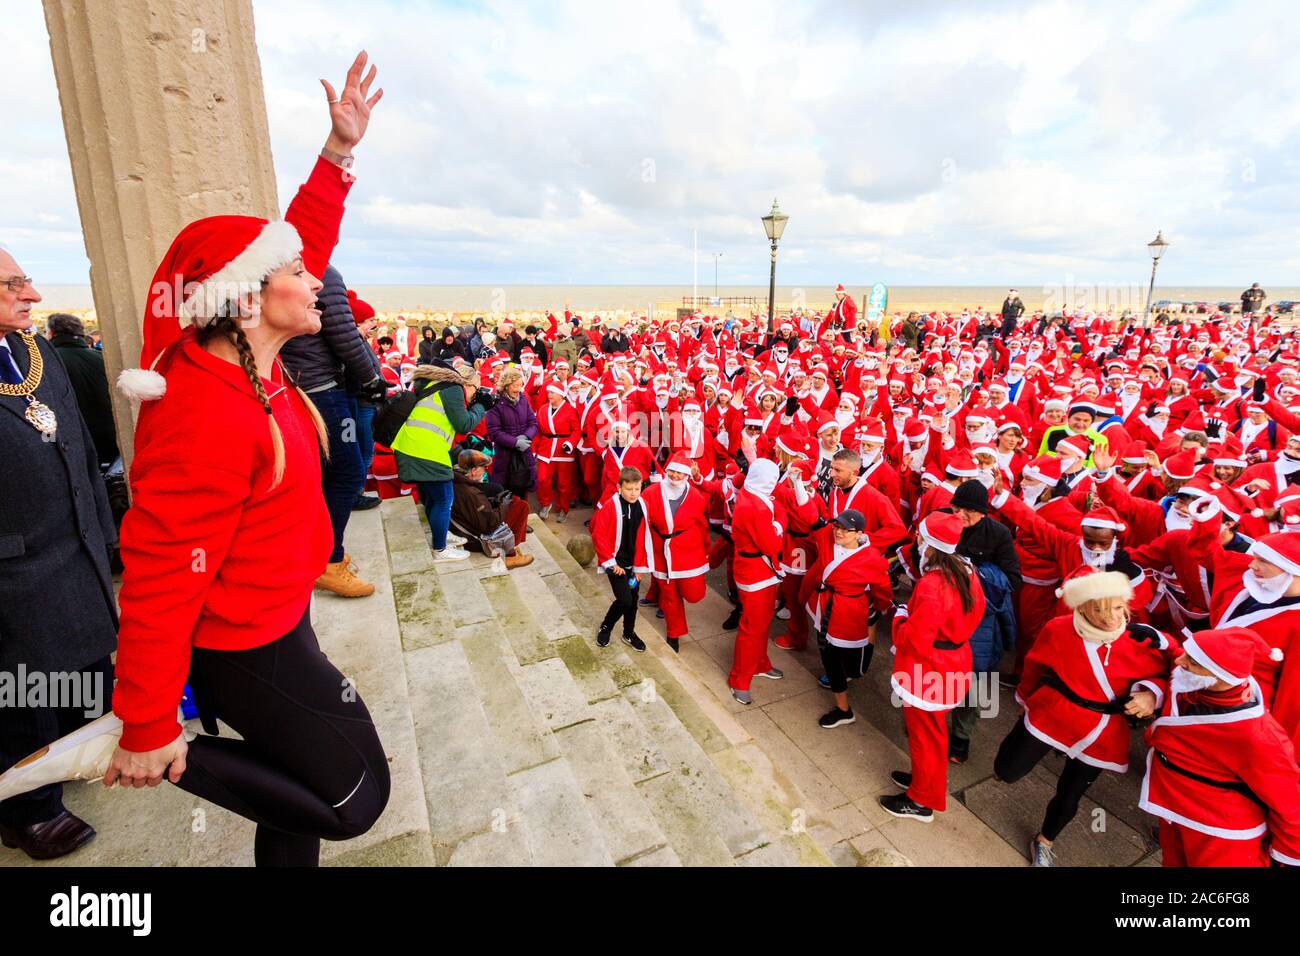 Young woman fitness trainer standing on top of steps directing group exercise with a crowd of people all dressed up as Father Christmas at the bottom of the steps on the seafront at Herne Bay in Kent, England. 'Santa's on the Run' Pilgrims hospices annual charity event. Stock Photo